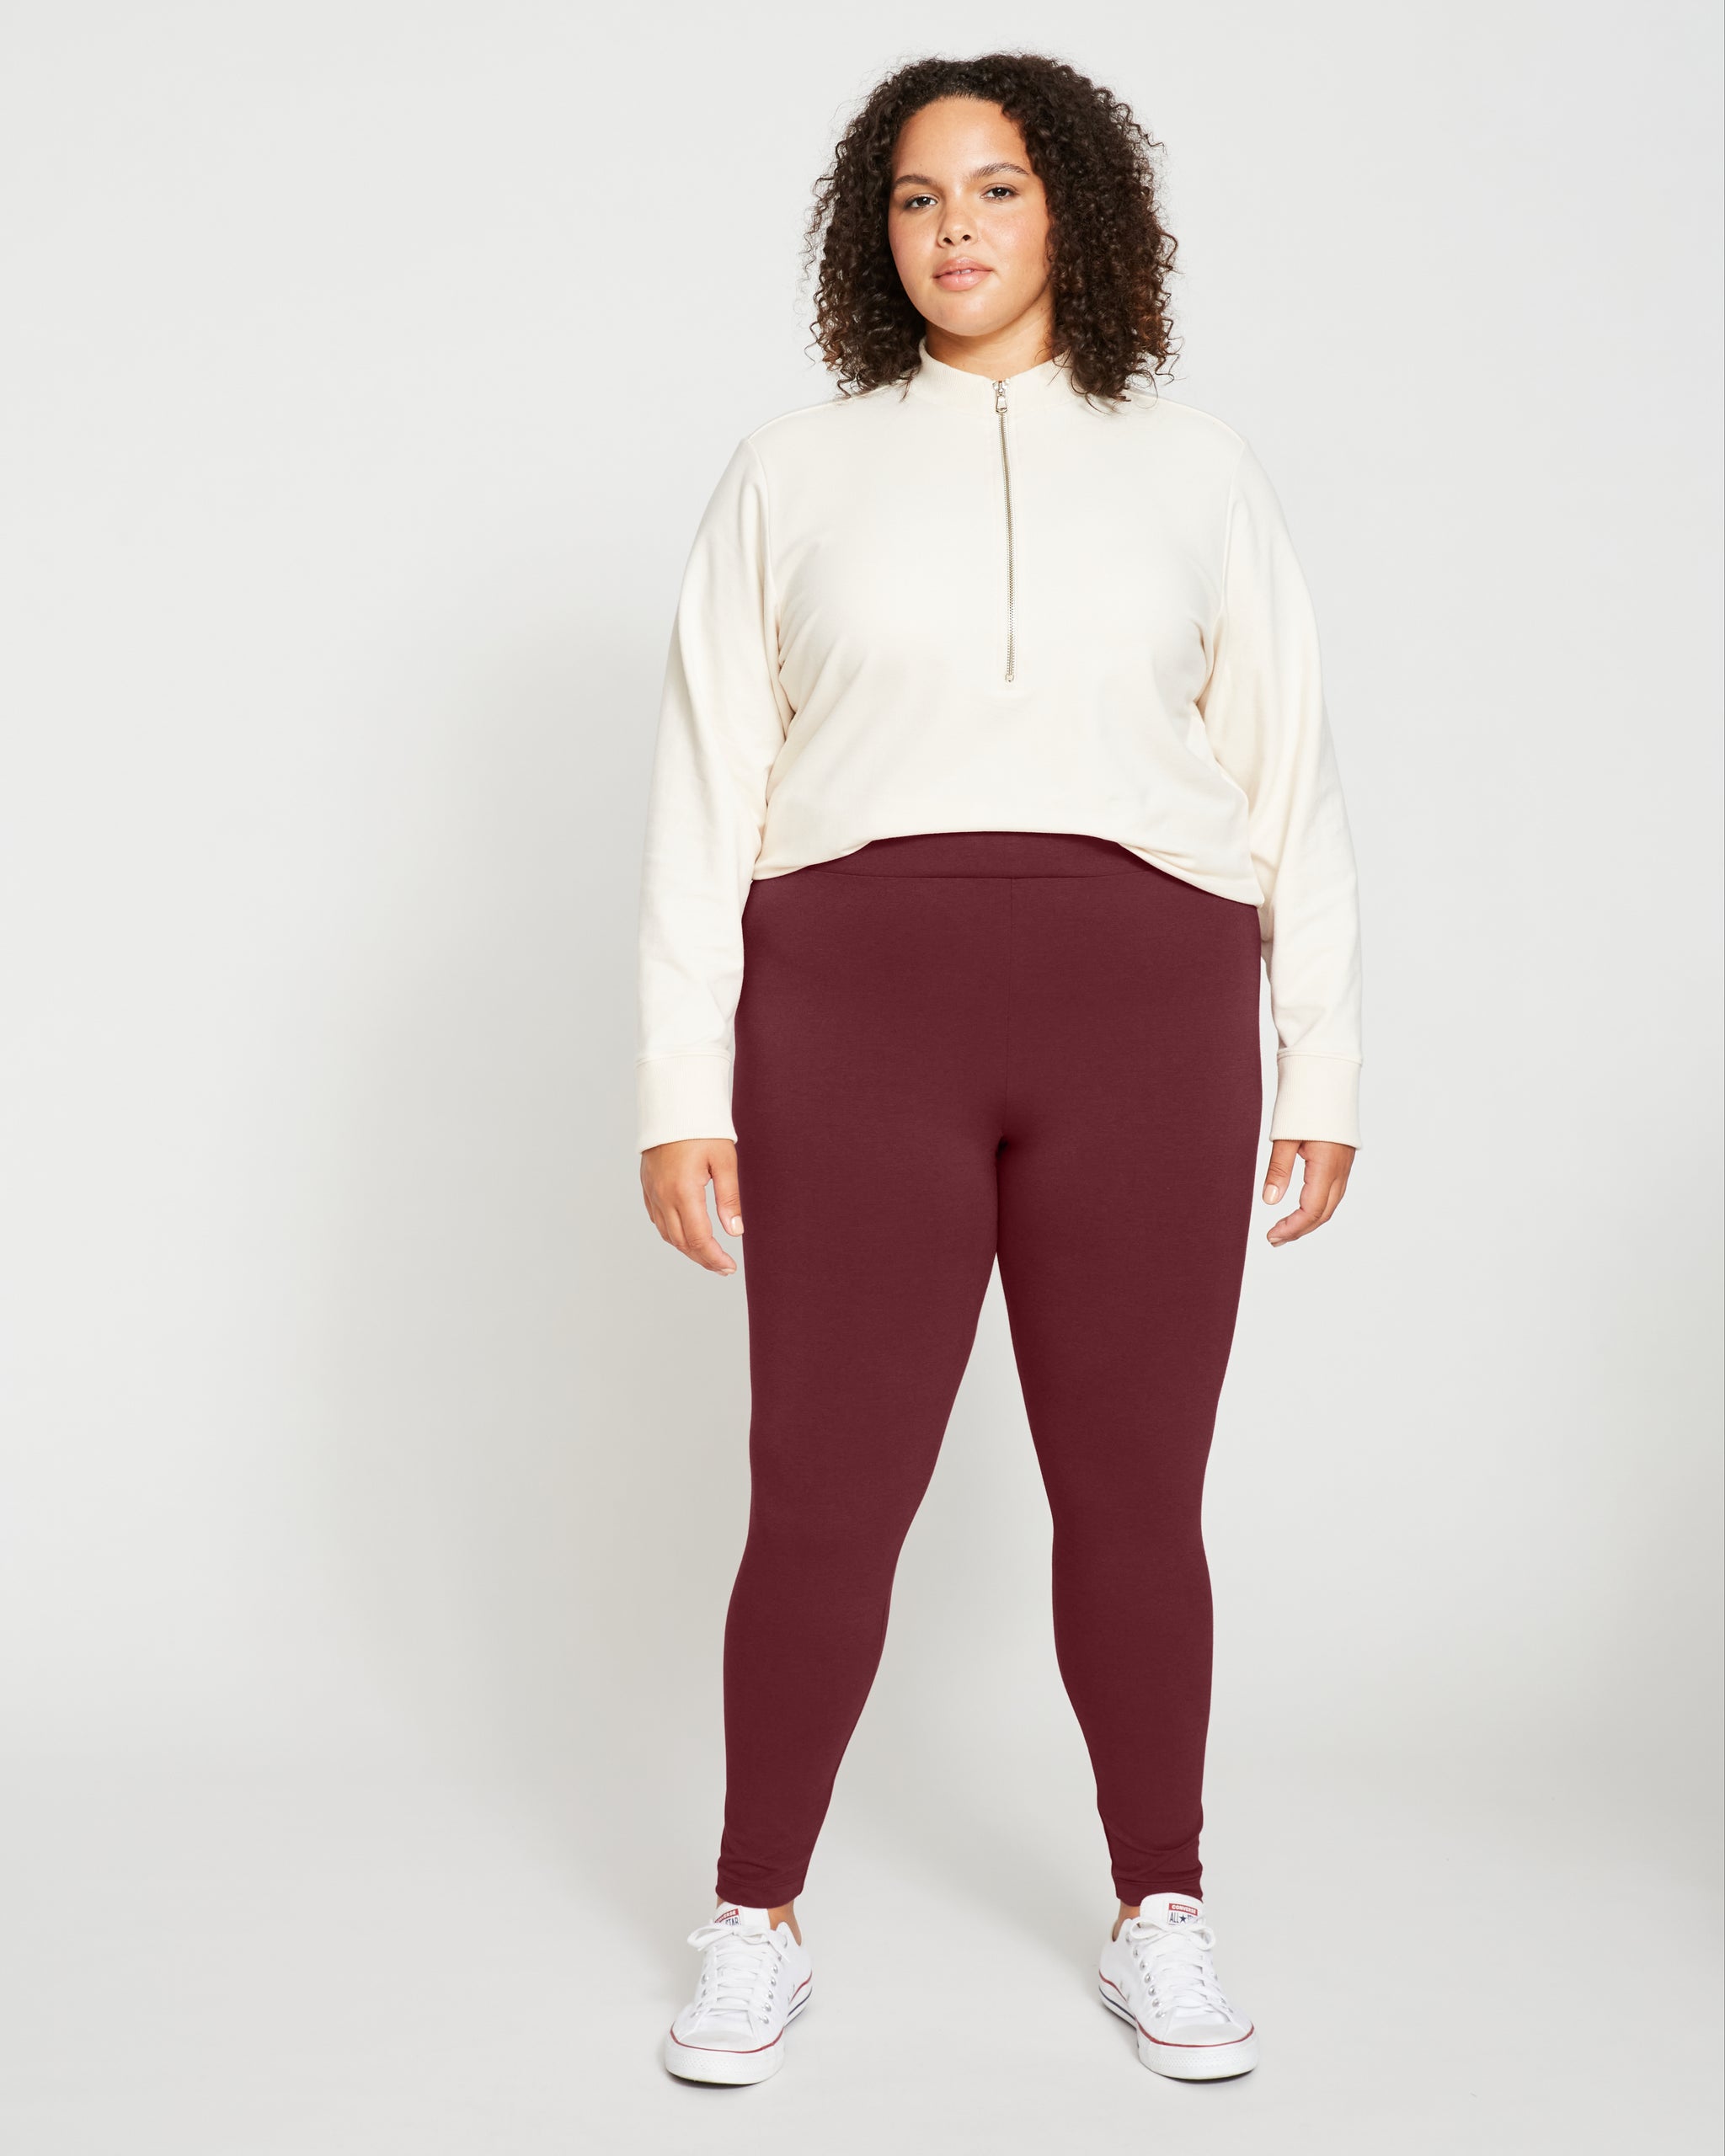 Women's Maroon Color (Pinkish Red) Ankle Length Stretch Legging